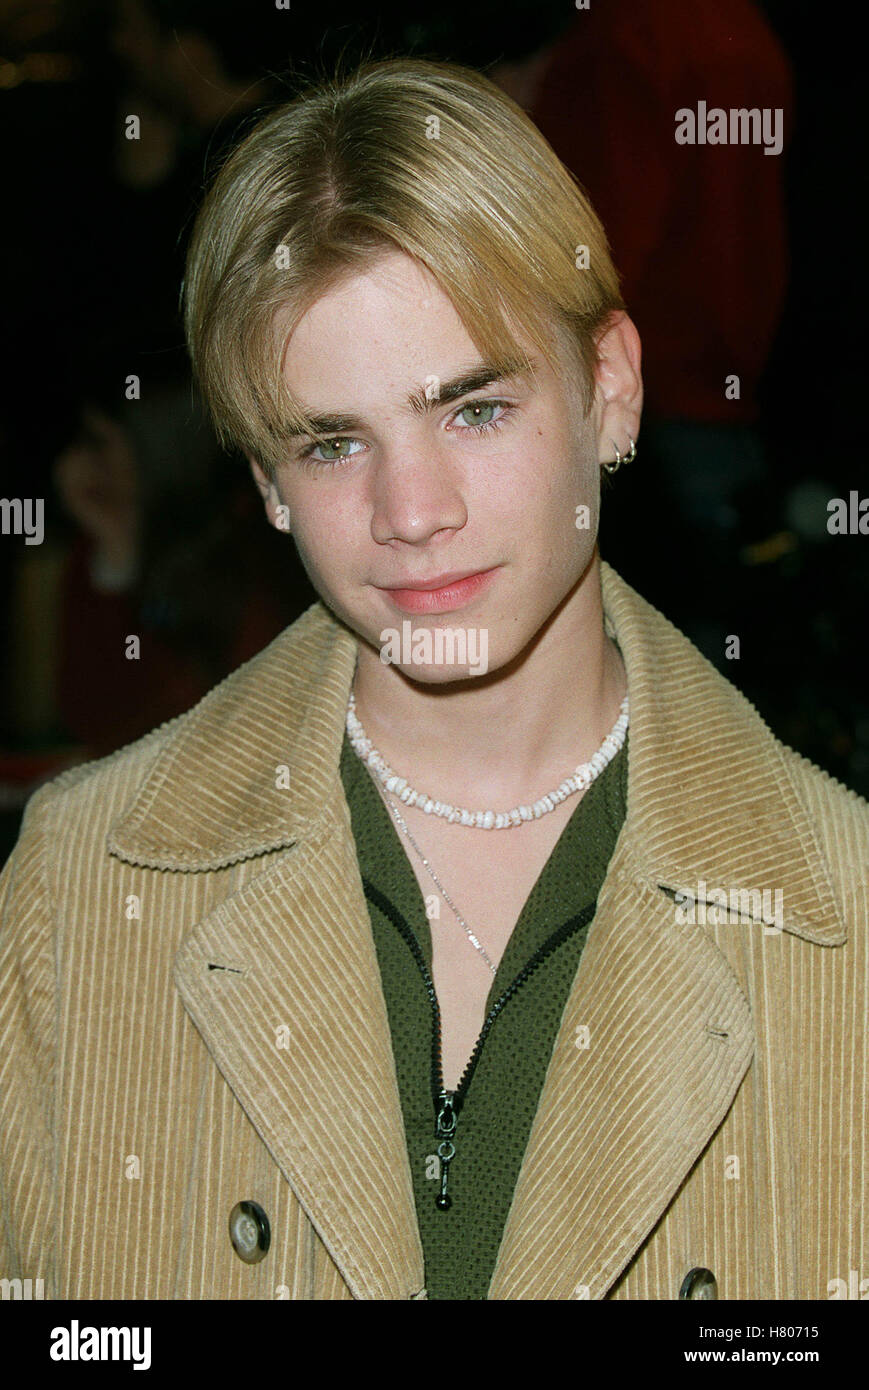 DAVID GALLAGHER RED PLANET PREMIERE LOS ANGELES MANN VILLAGE THEATRE WESTWOOD LOS ANGELES USA 06 November 2000 Stock Photo